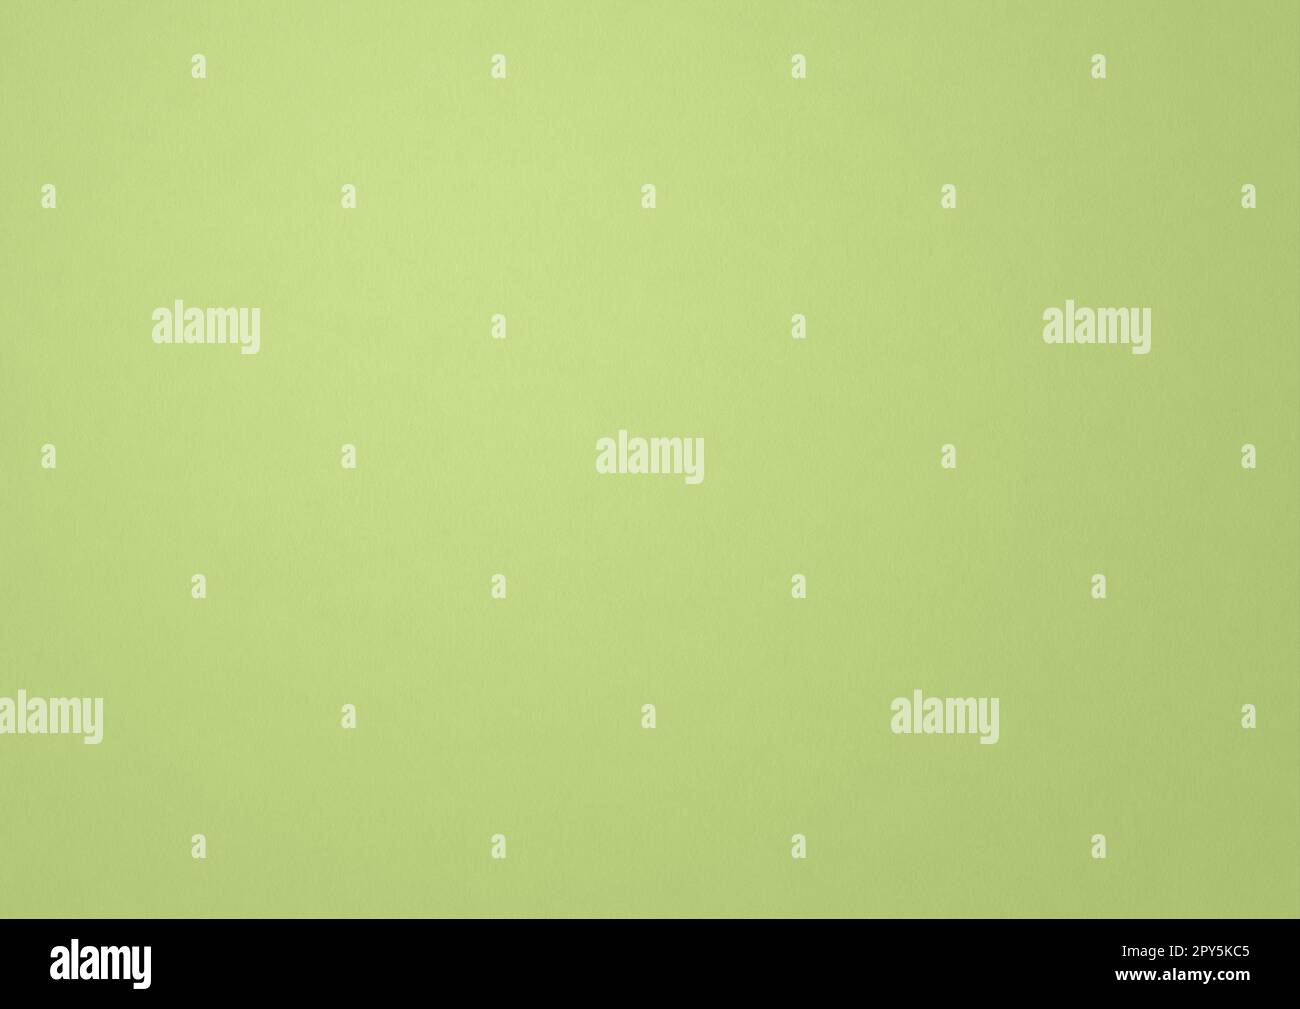 Pastel Green Paper Texture Picture, Free Photograph